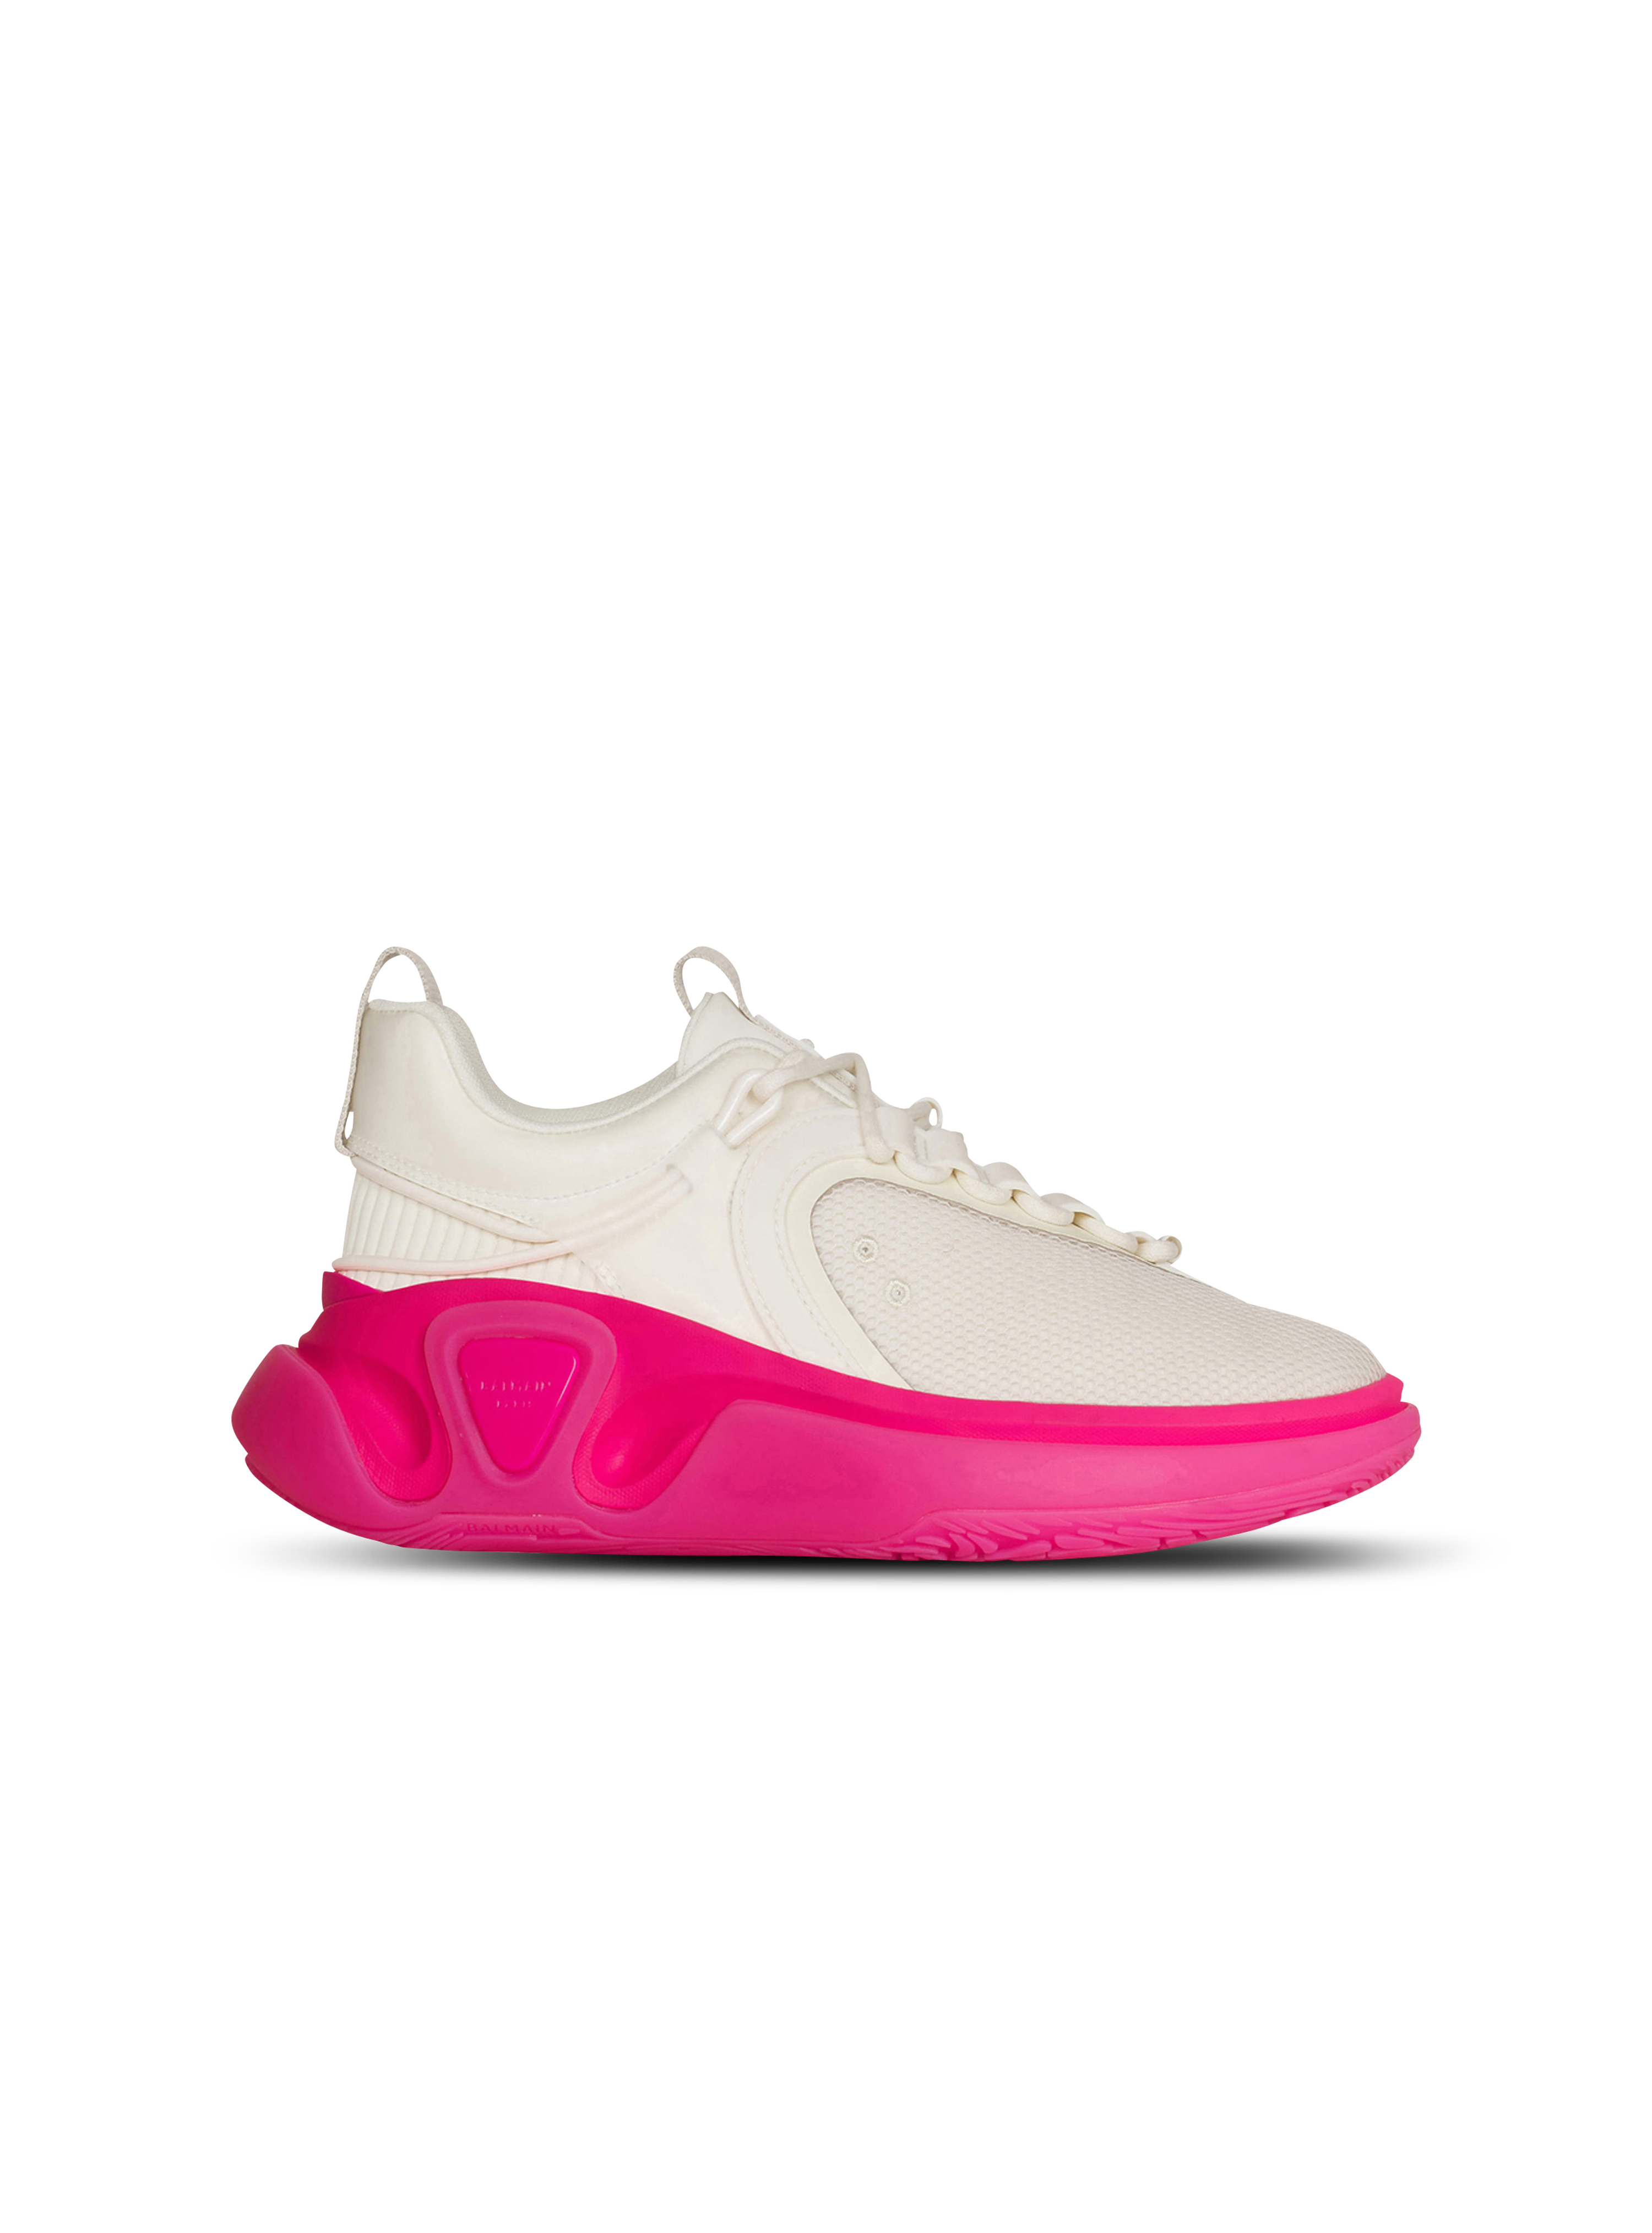 Gummy leather and mesh B-Runner sneakers, pink